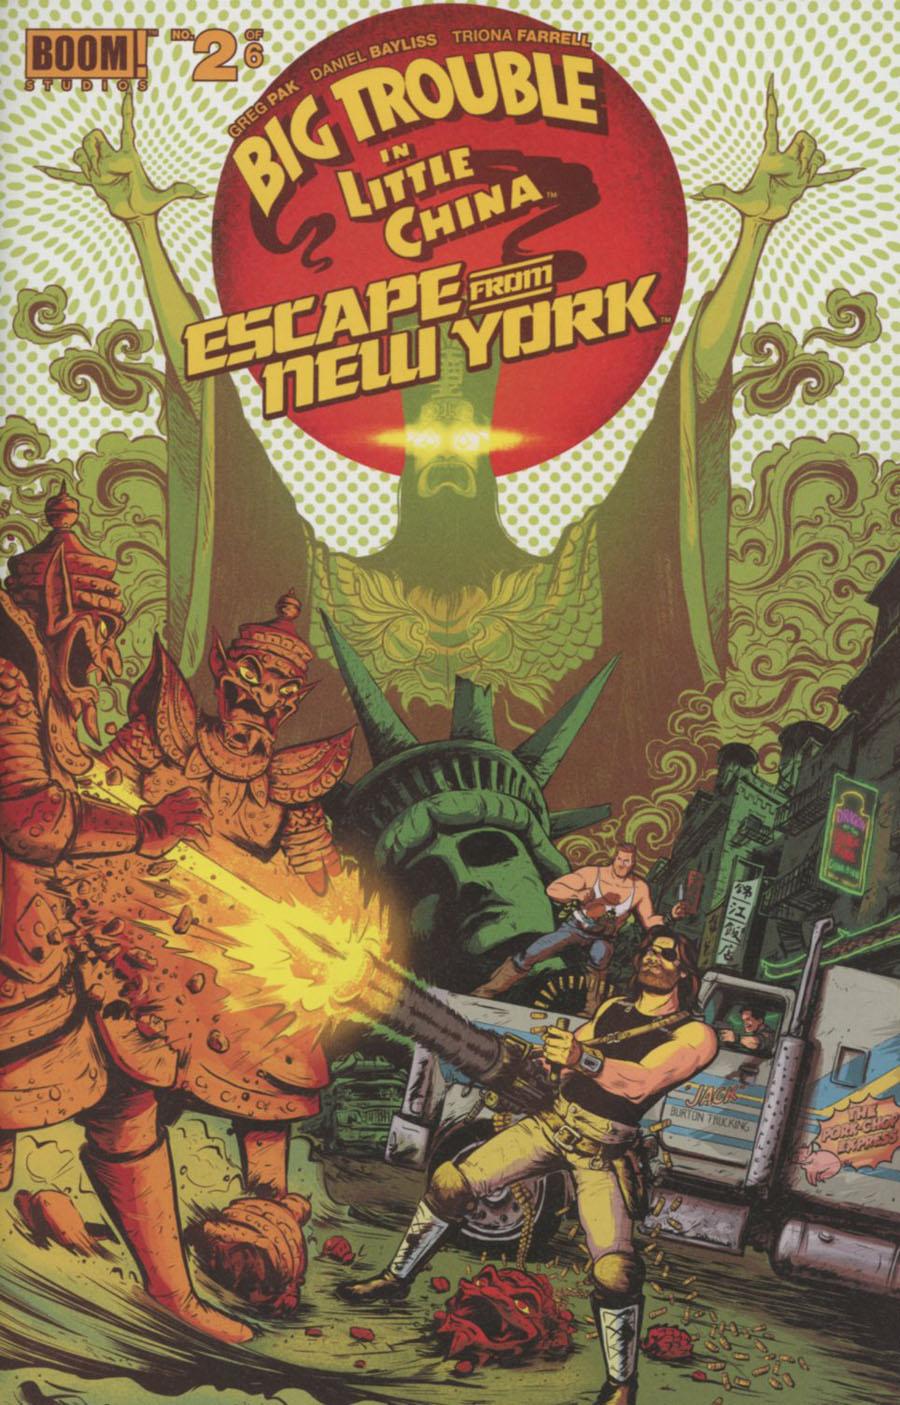 Big Trouble In Little China Escape From New York Vol. 1 #2